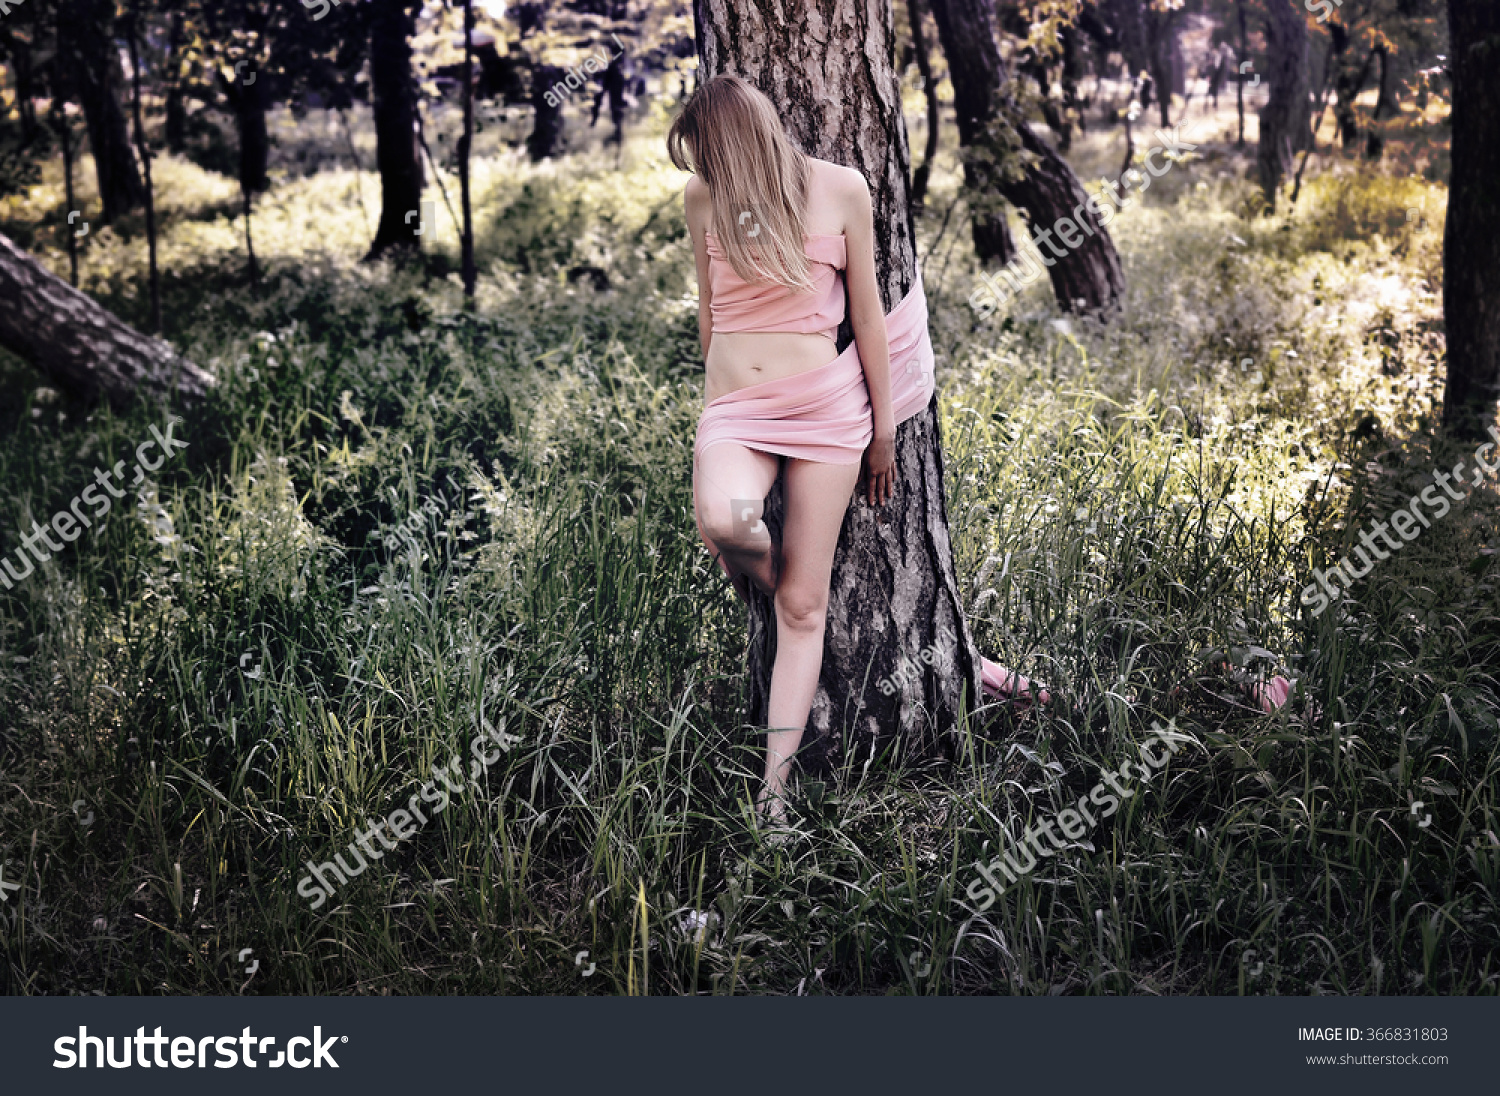 Lost Forest Naked Woman Tied Ribbon image